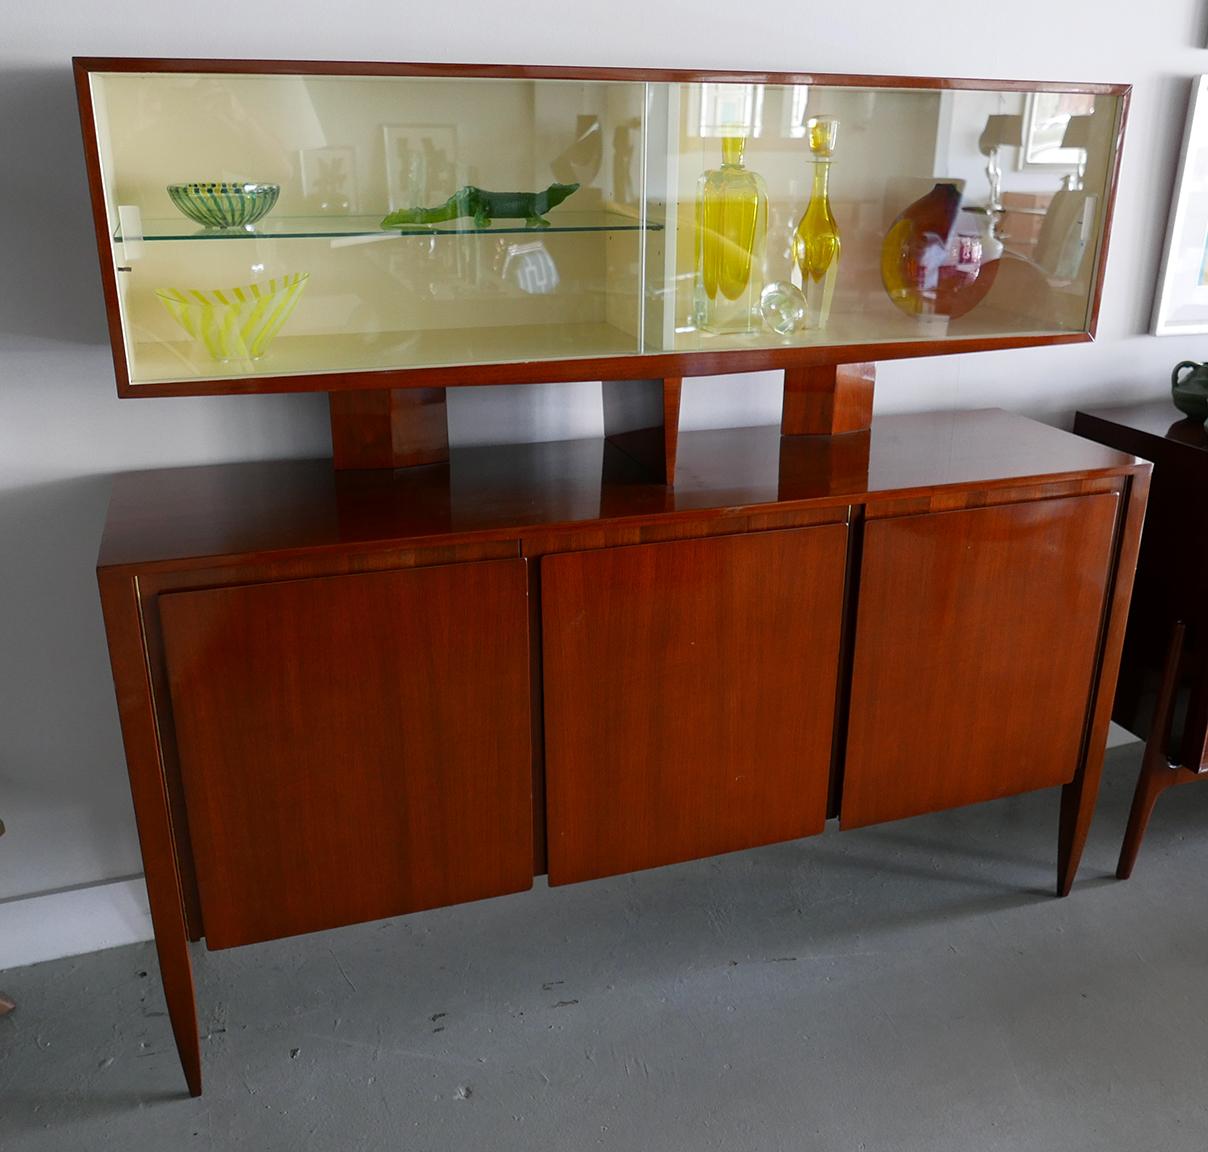 Italian Modern 2-Tier Cabinet by Gio Ponti for M. Singer & Sons. Three-door cabinet with interior double-wide drawers. One door opens to reveal open shelf storage. Up top is a floating display cabinet with white painted interior and sliding glass